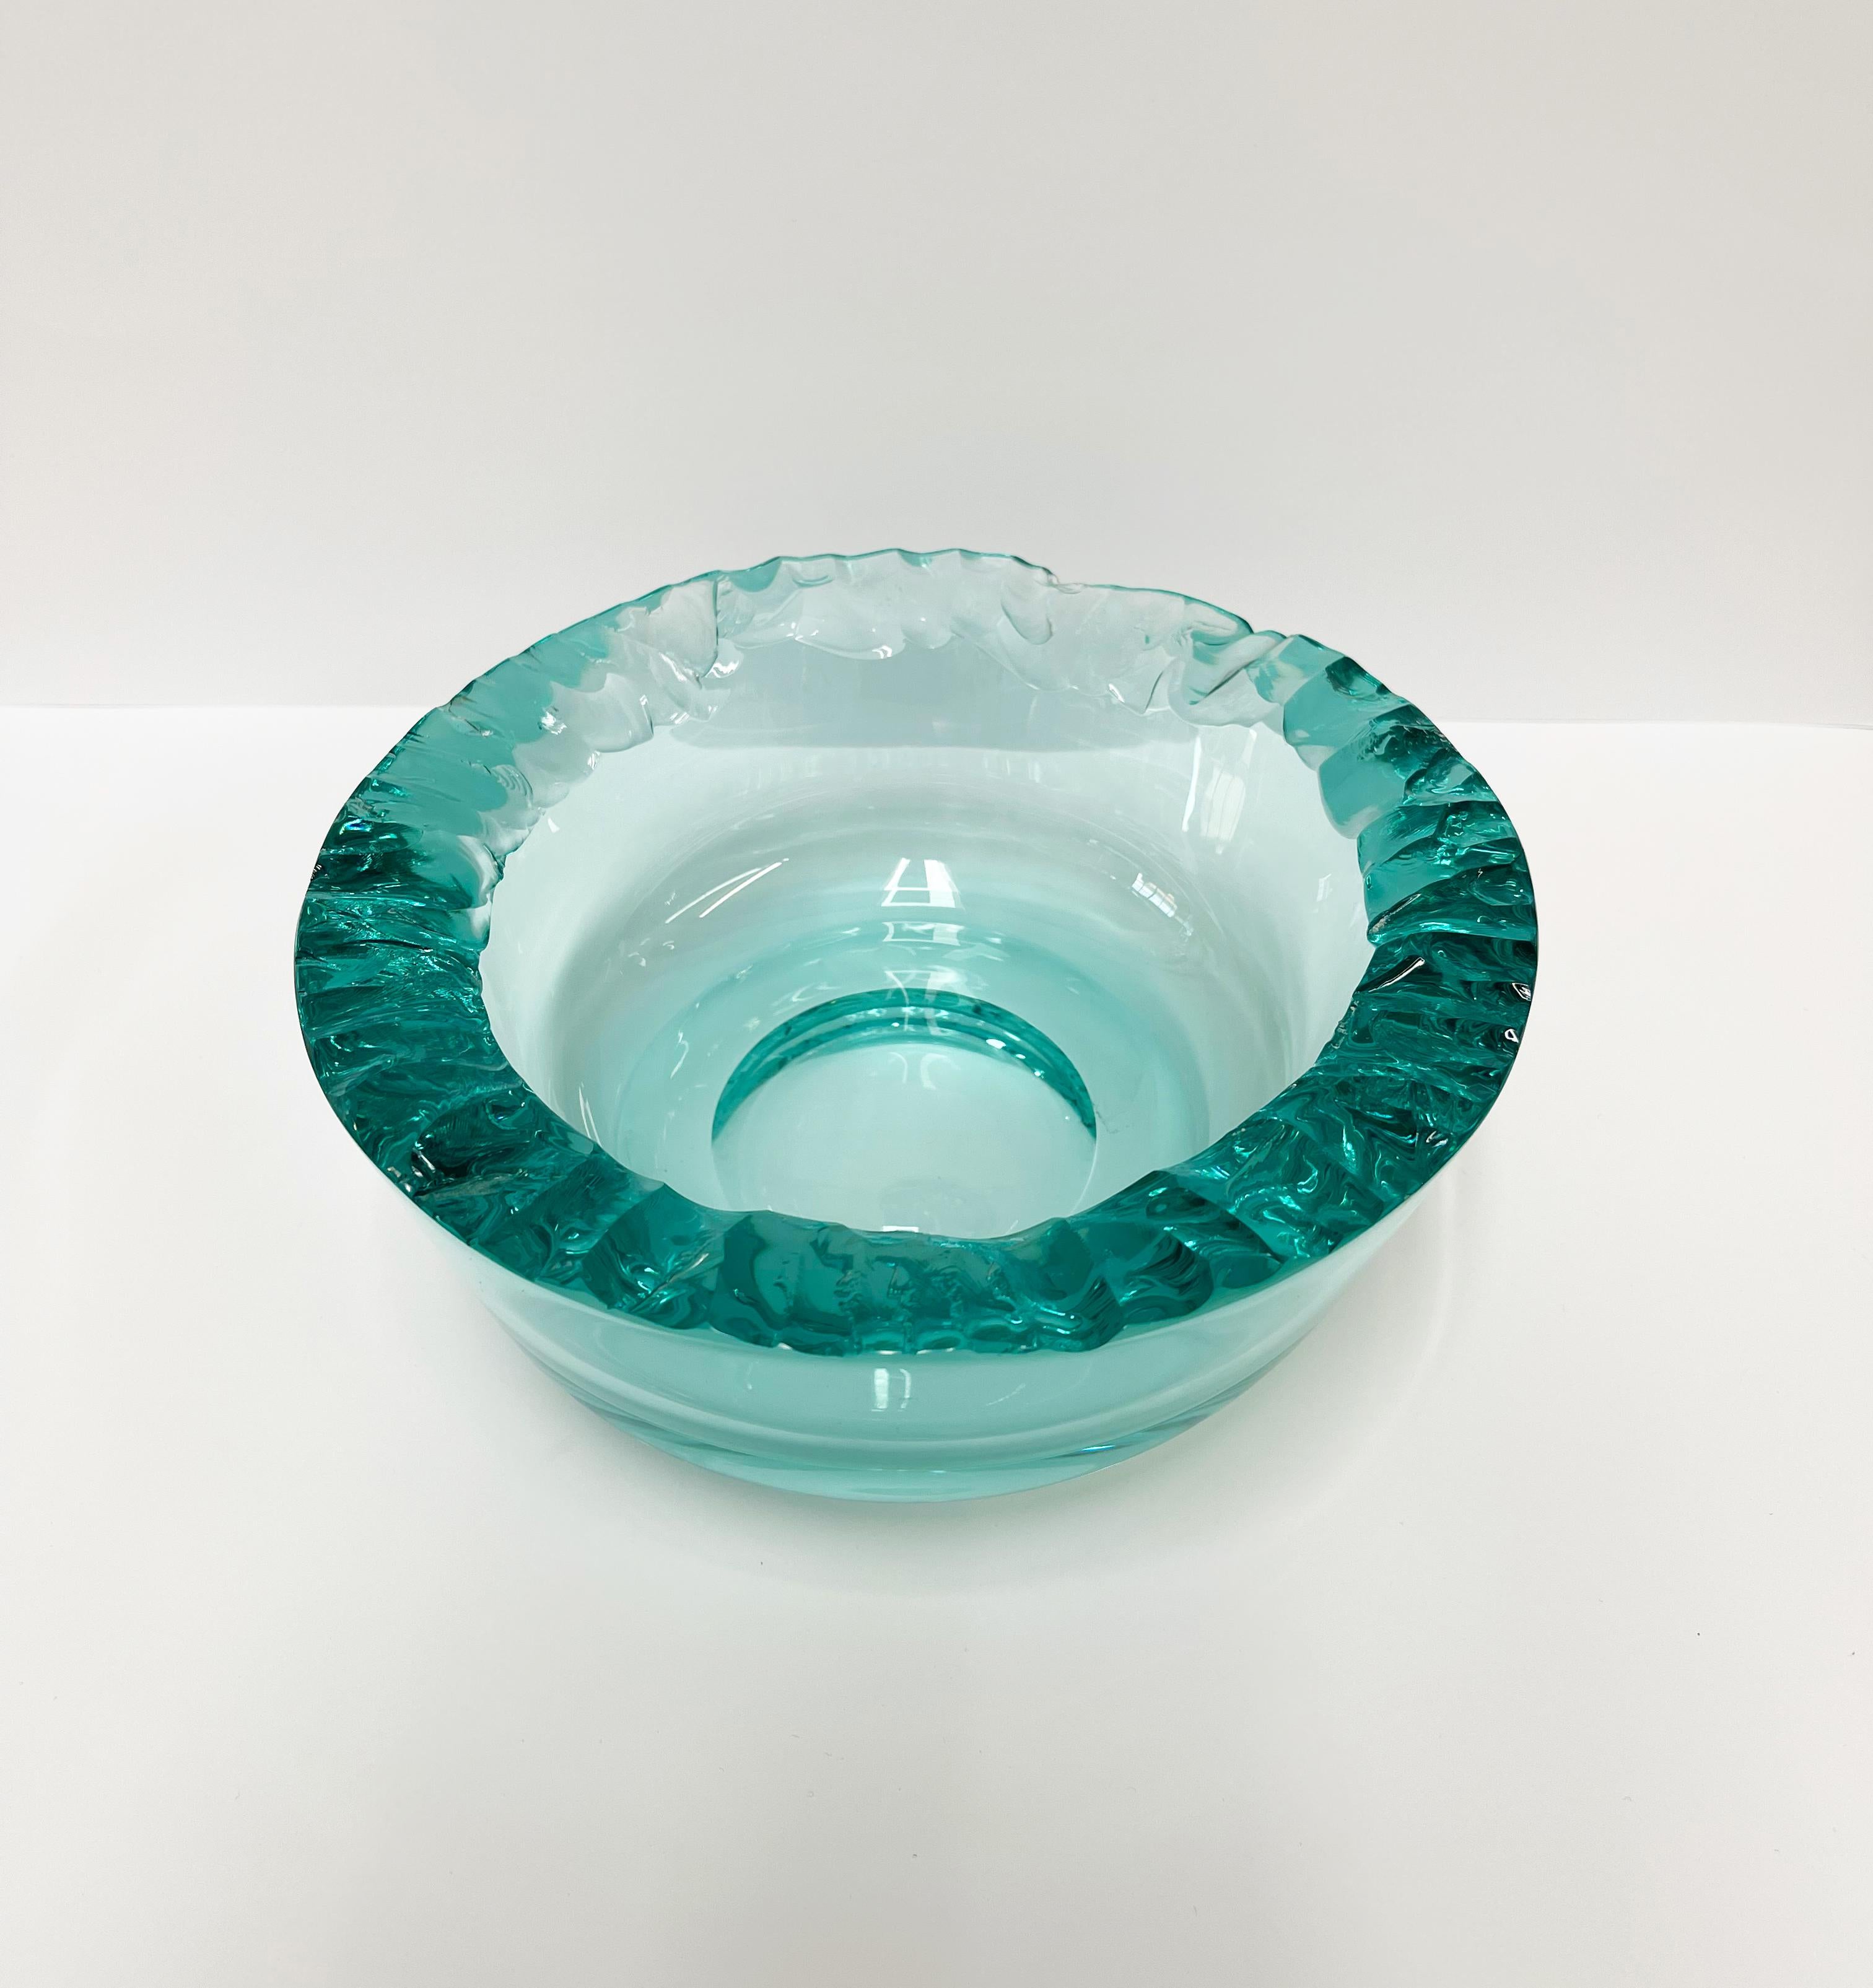 Glass Contemporary Artistic Bowl Hand Crafted Aquamarine Crystal by Ghirò Studio For Sale